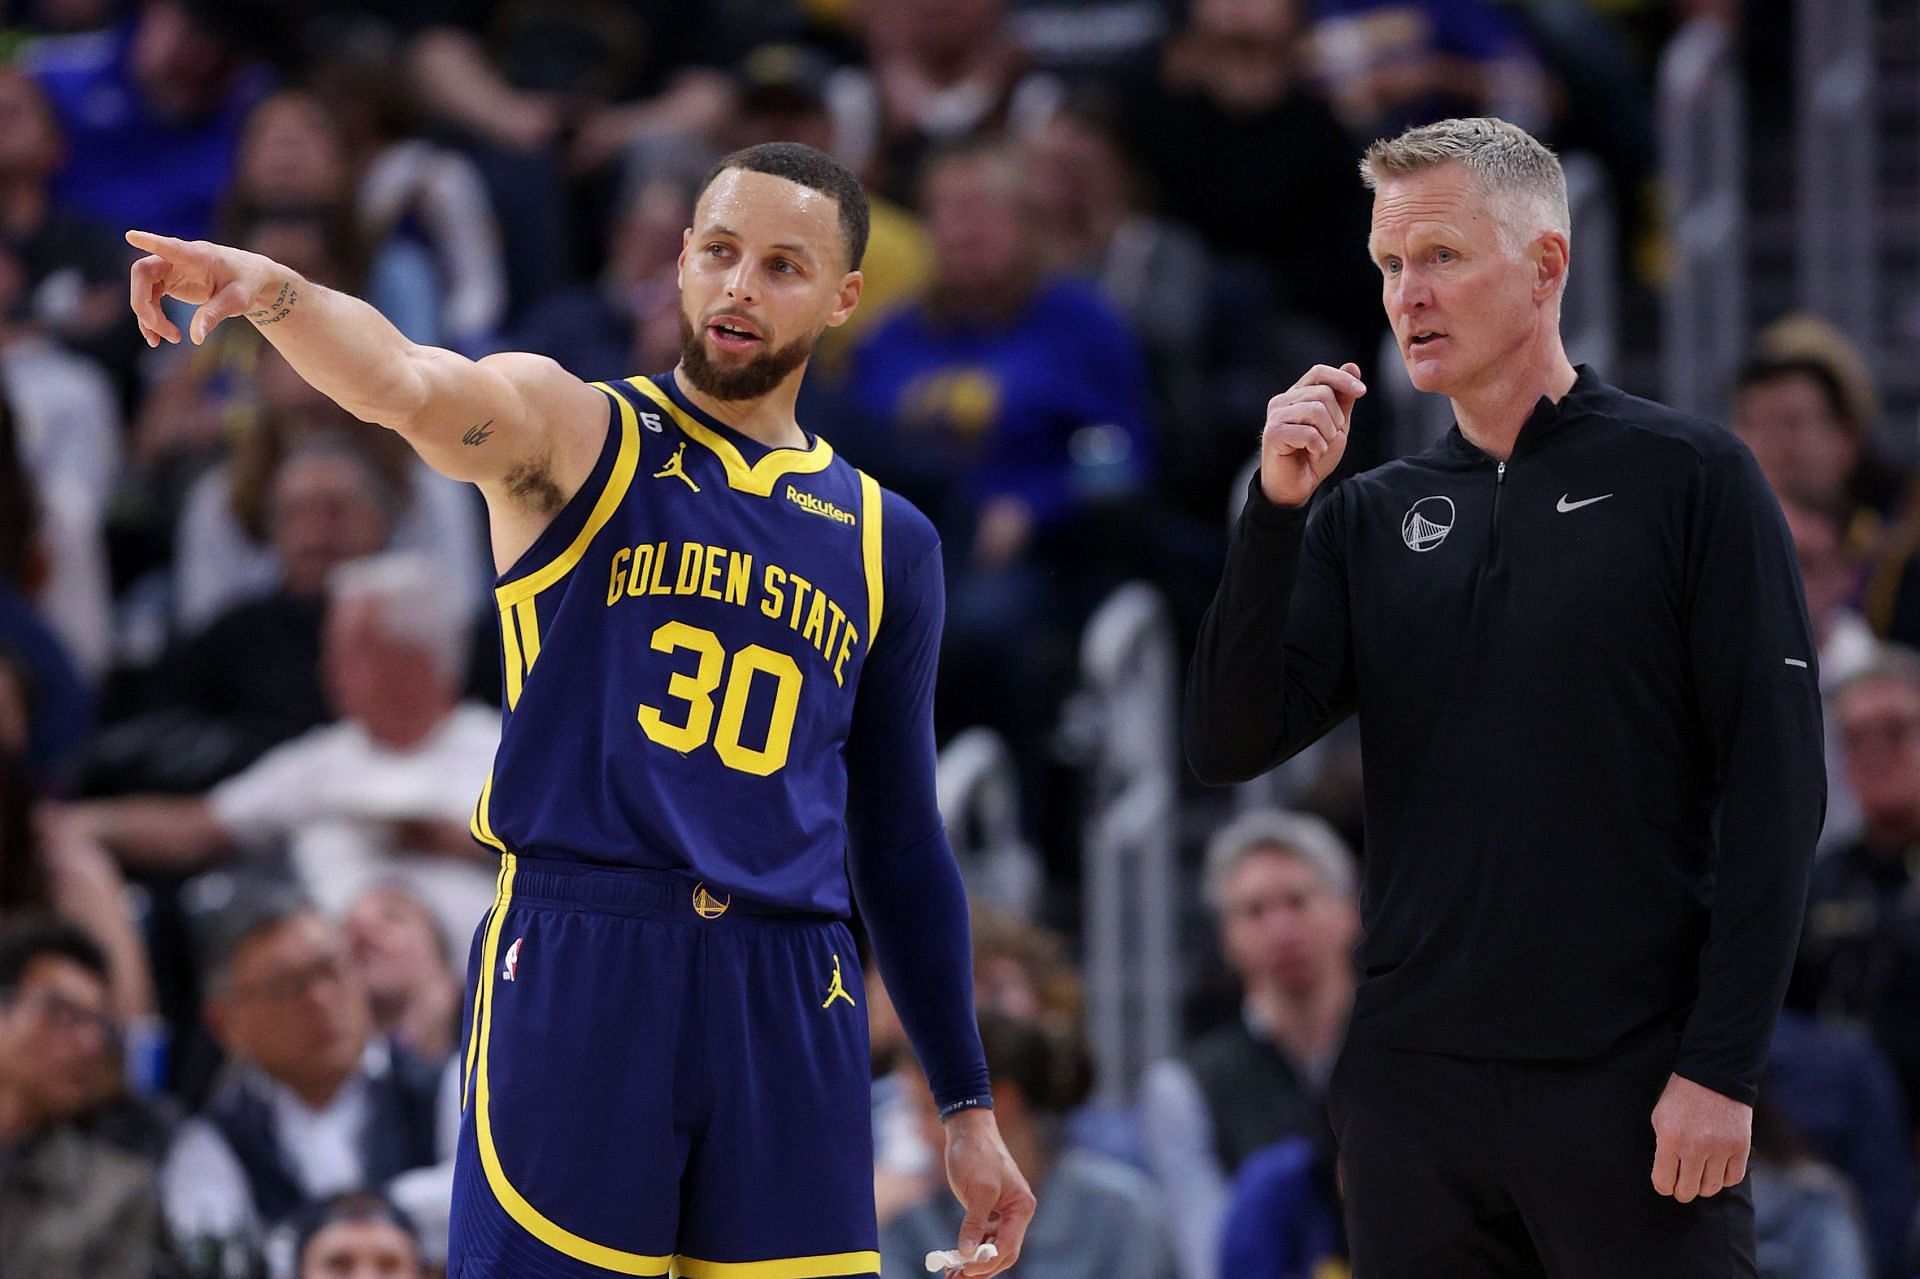 Steph Curry and Steve Kerr of the Golden State Warriors